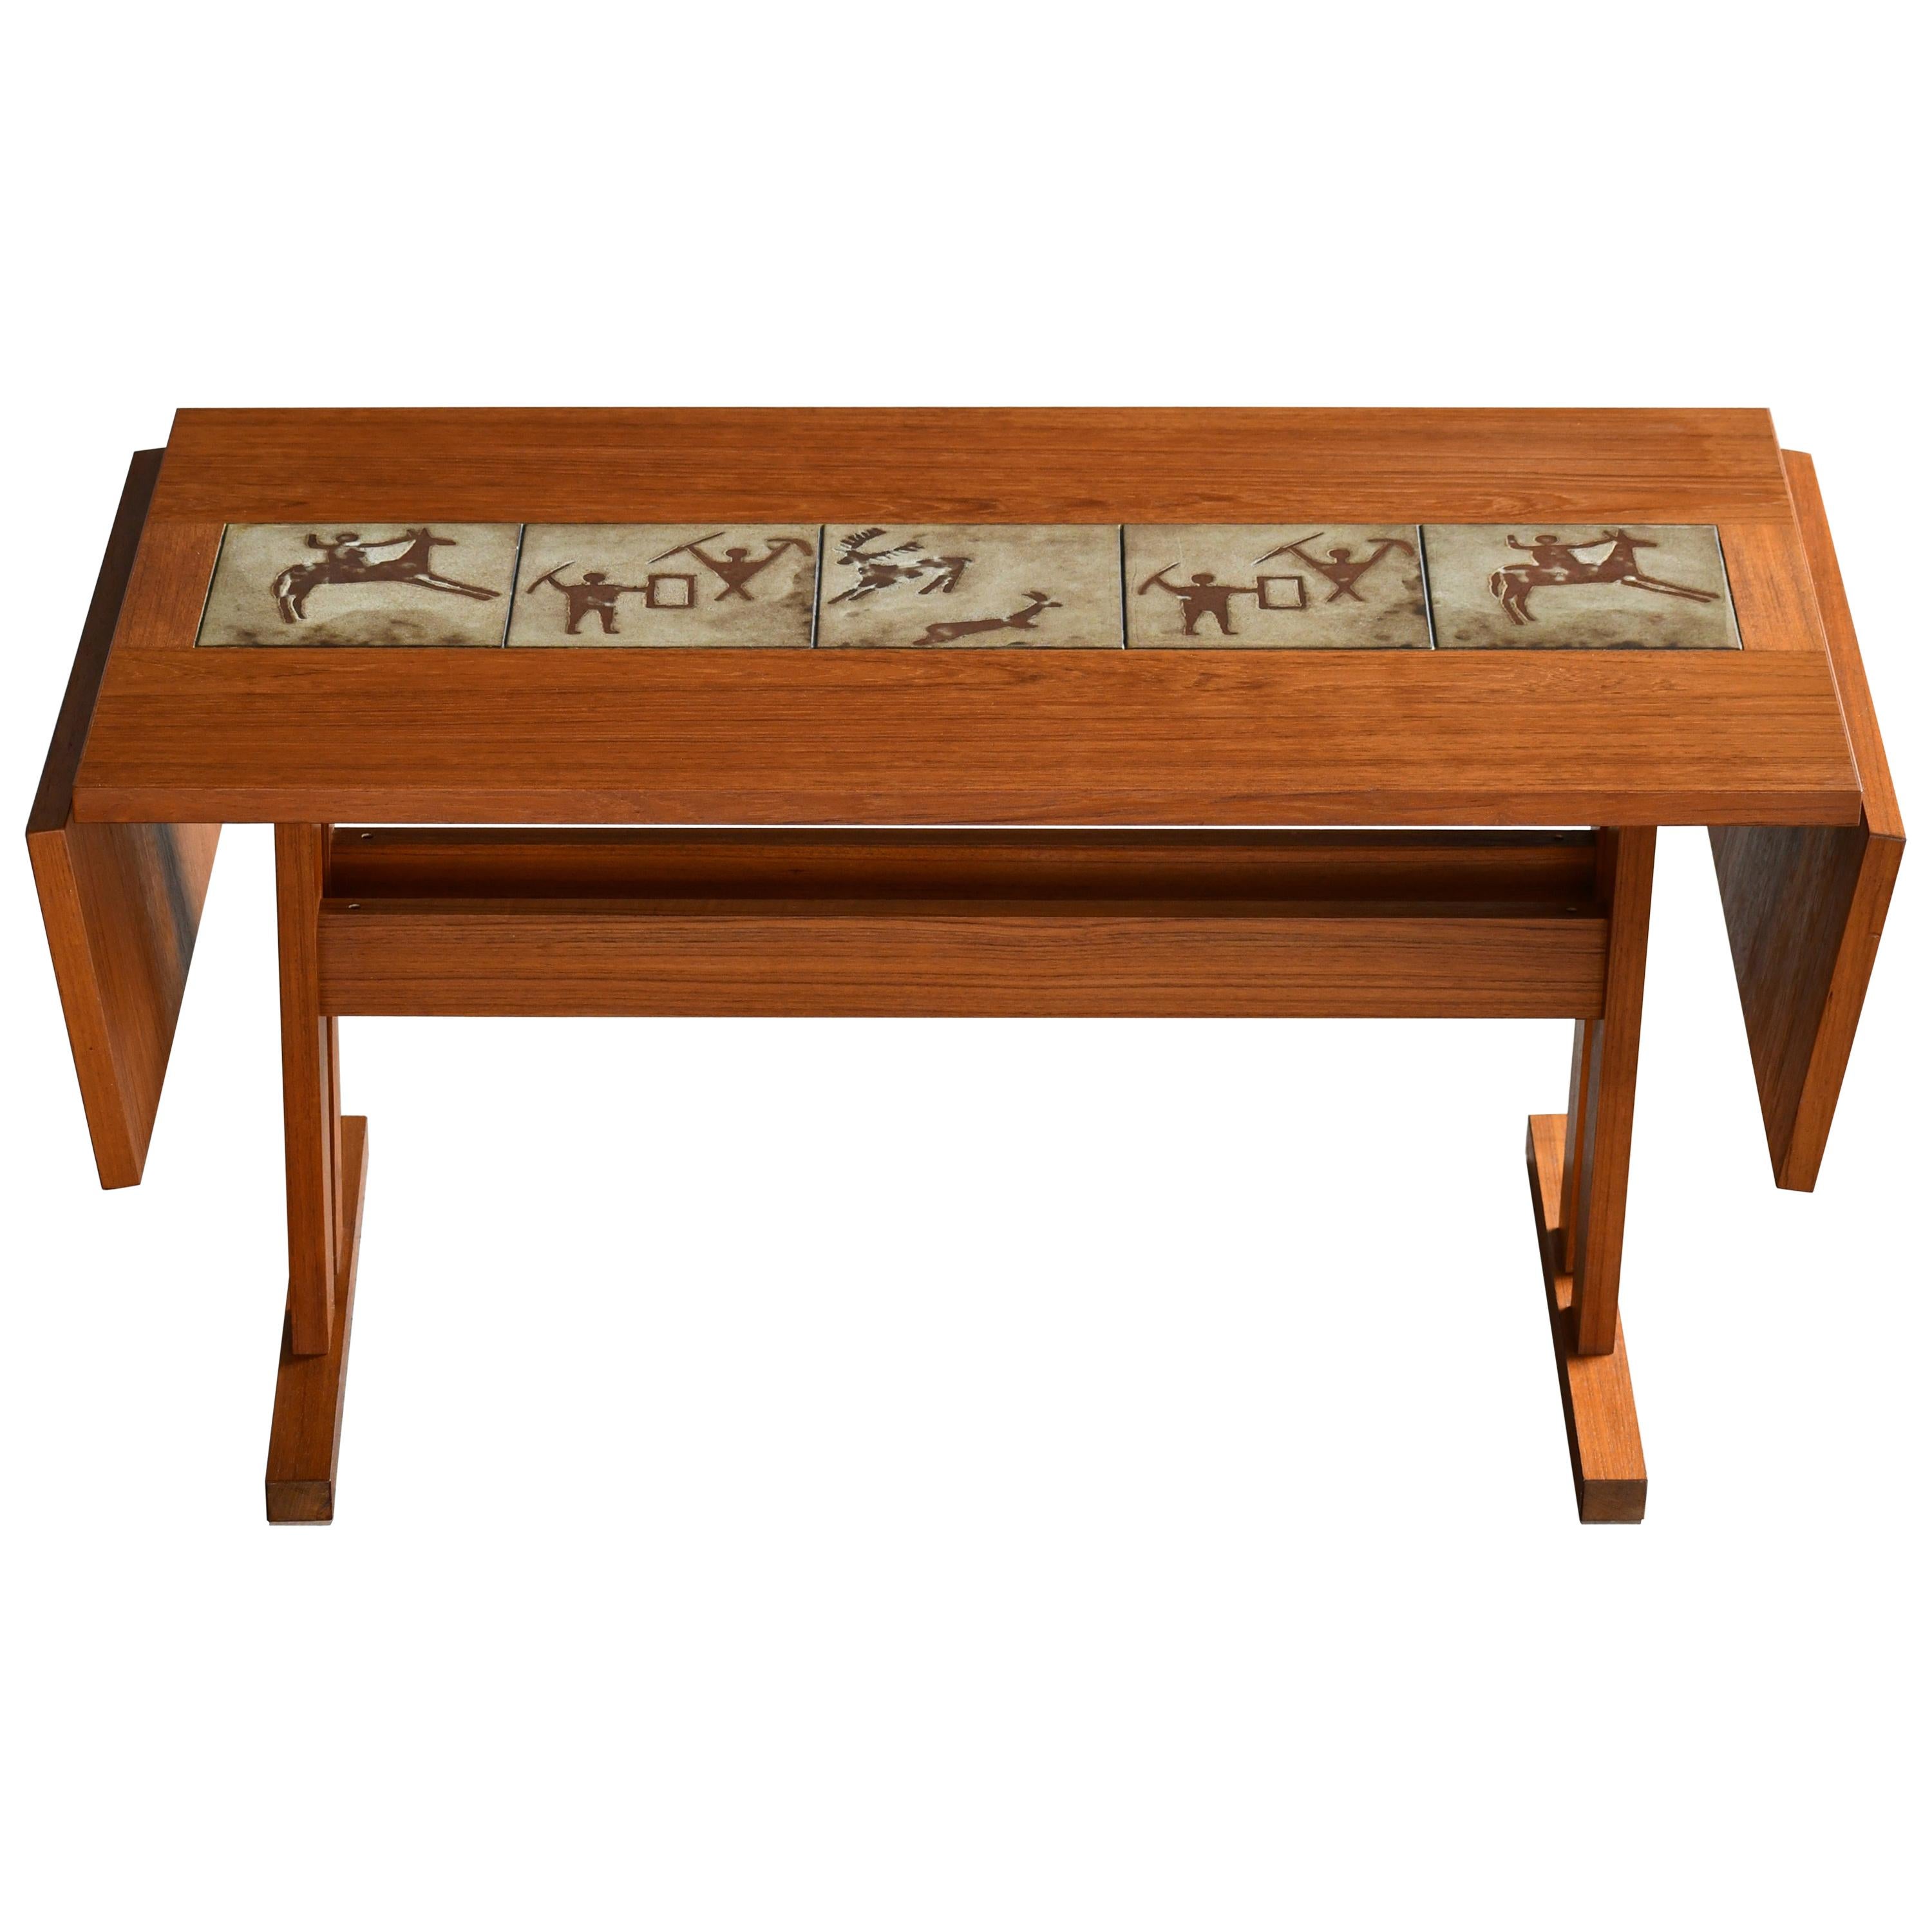 Danish Extension Dining Table in Teak with Ceramic Tiles, circa 1970 For Sale